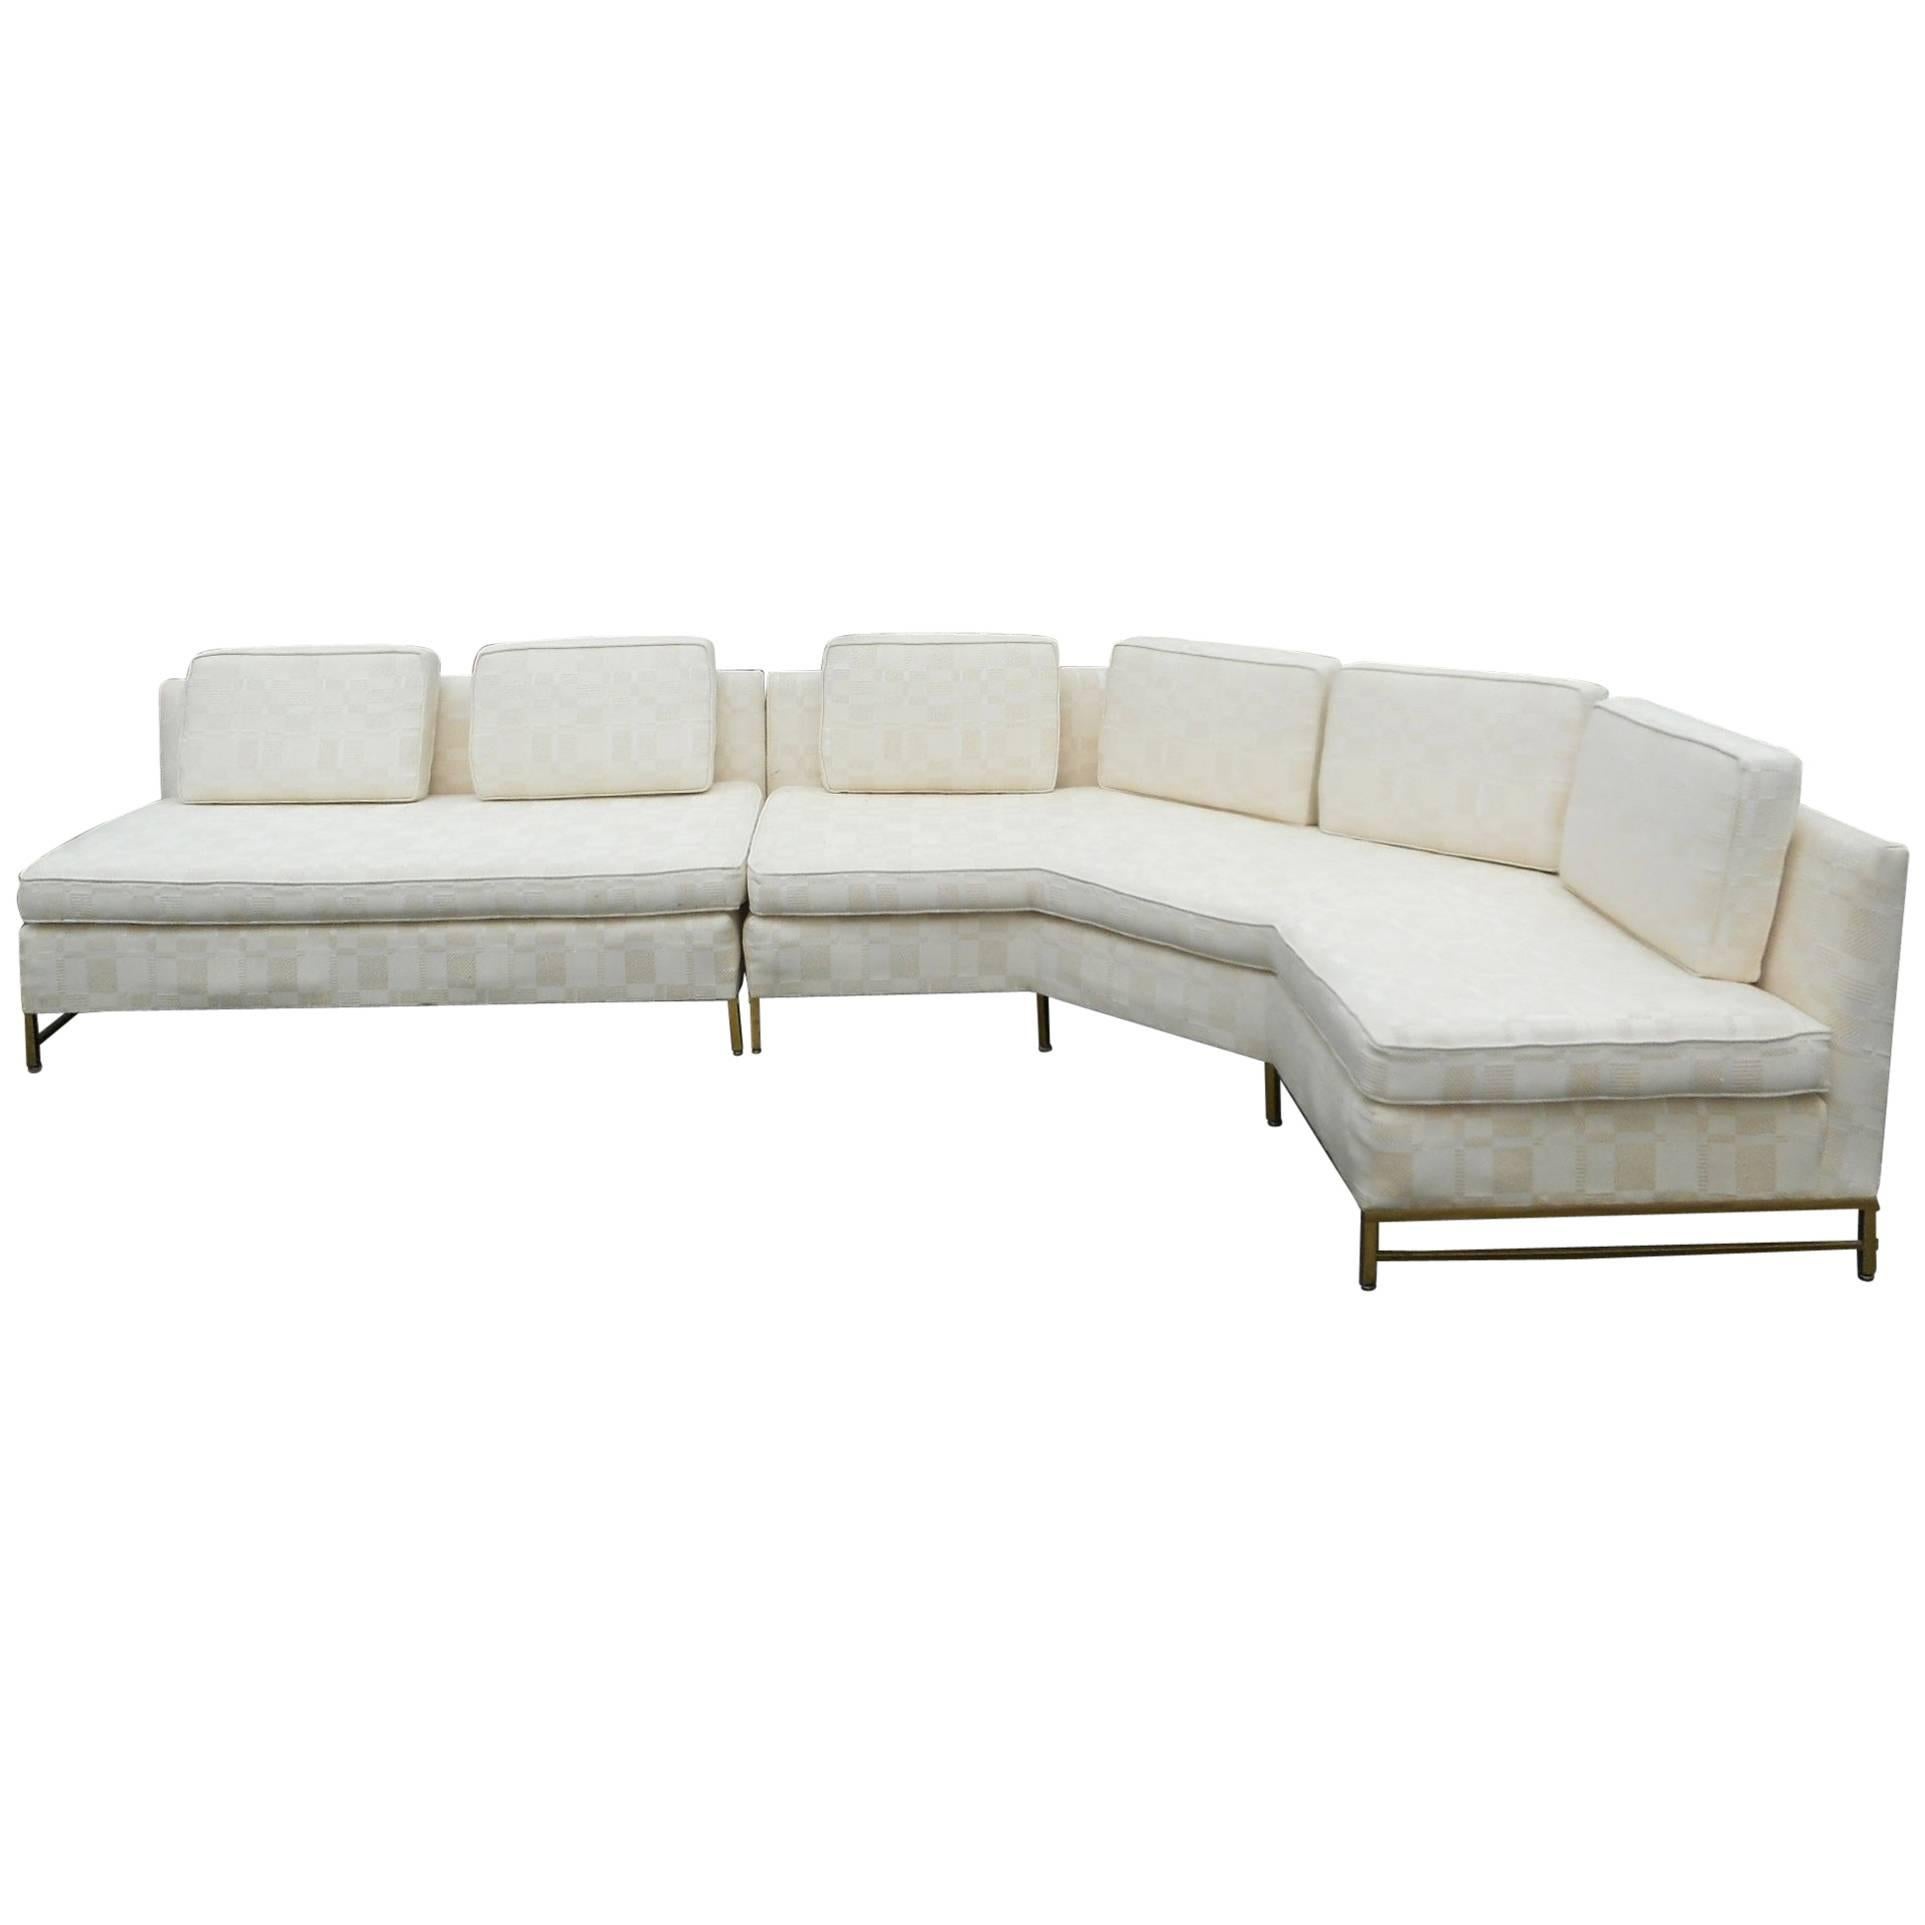 Impressive Two-Piece Mid-Century Modern Sofa by Paul McCobb for Directional